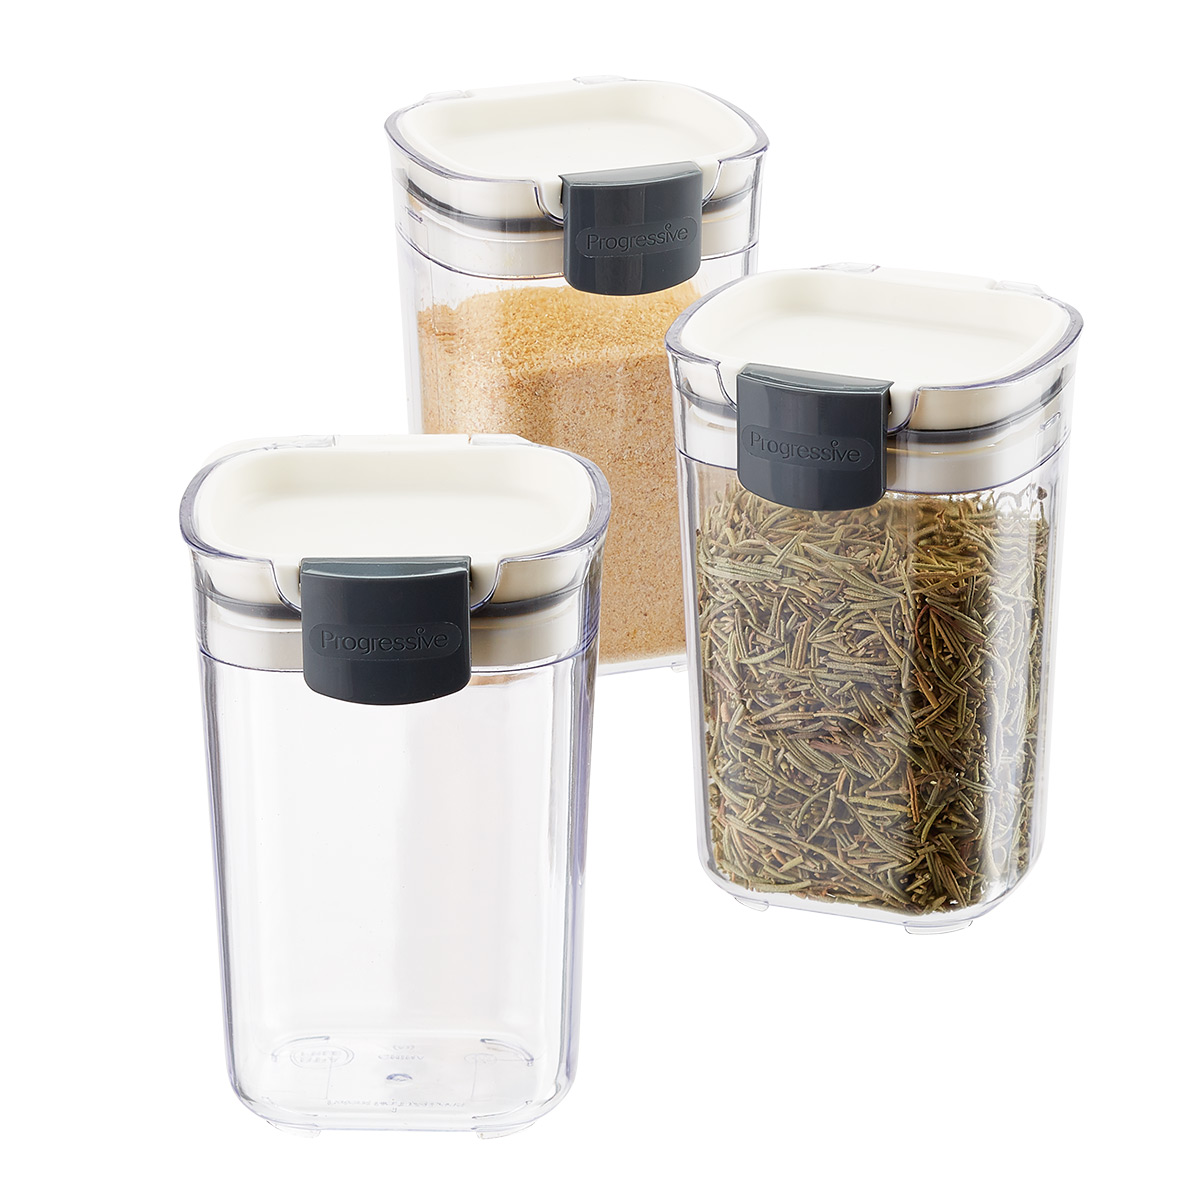 https://www.containerstore.com/catalogimages/364058/10077313-prokeeper-seasoning-keepers.jpg